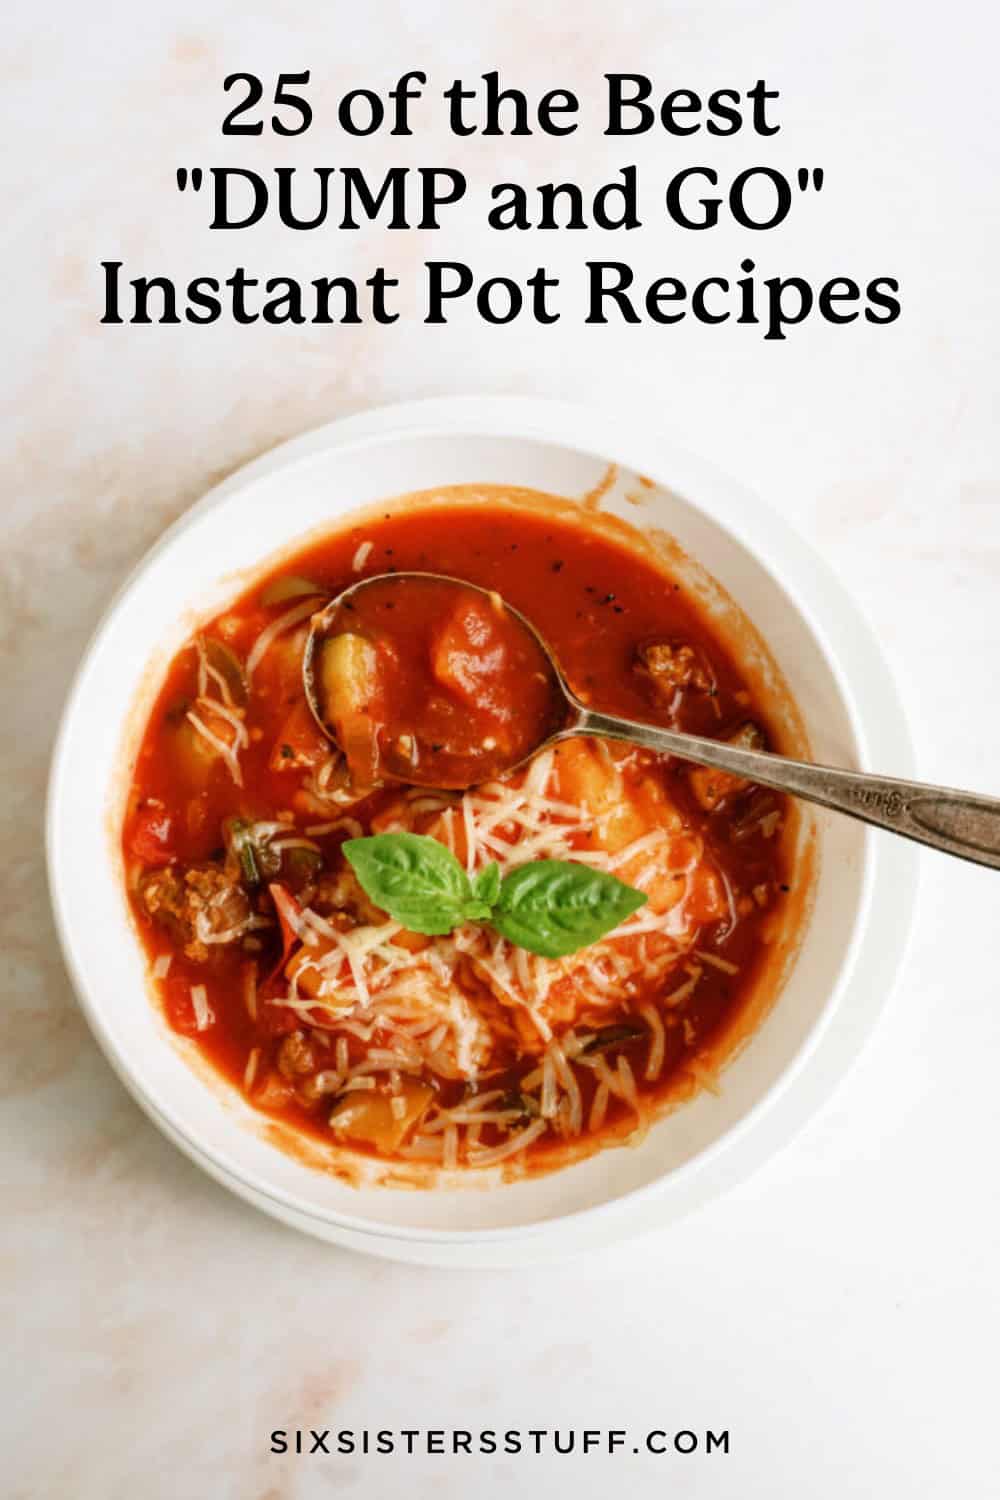 25 of the Best Dump and Go Instant Pot Recipes